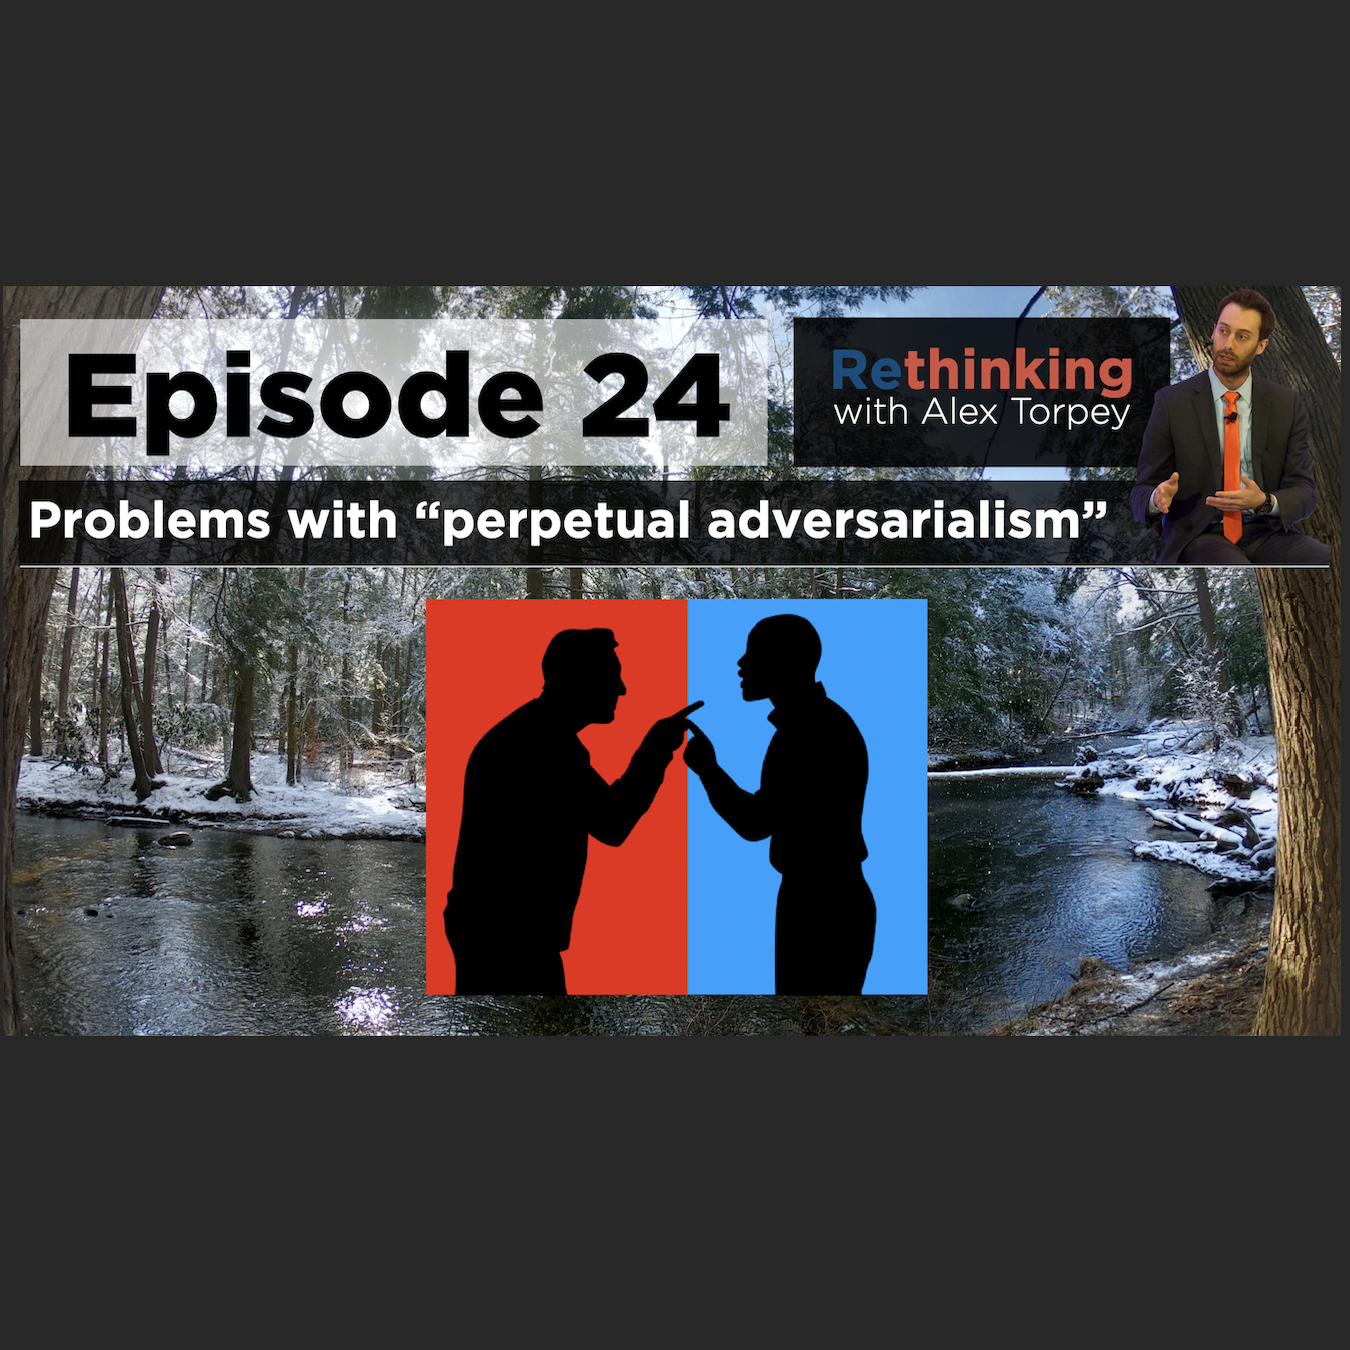 Ep #24: Problems with "perpetual adversarialism" and what we can do